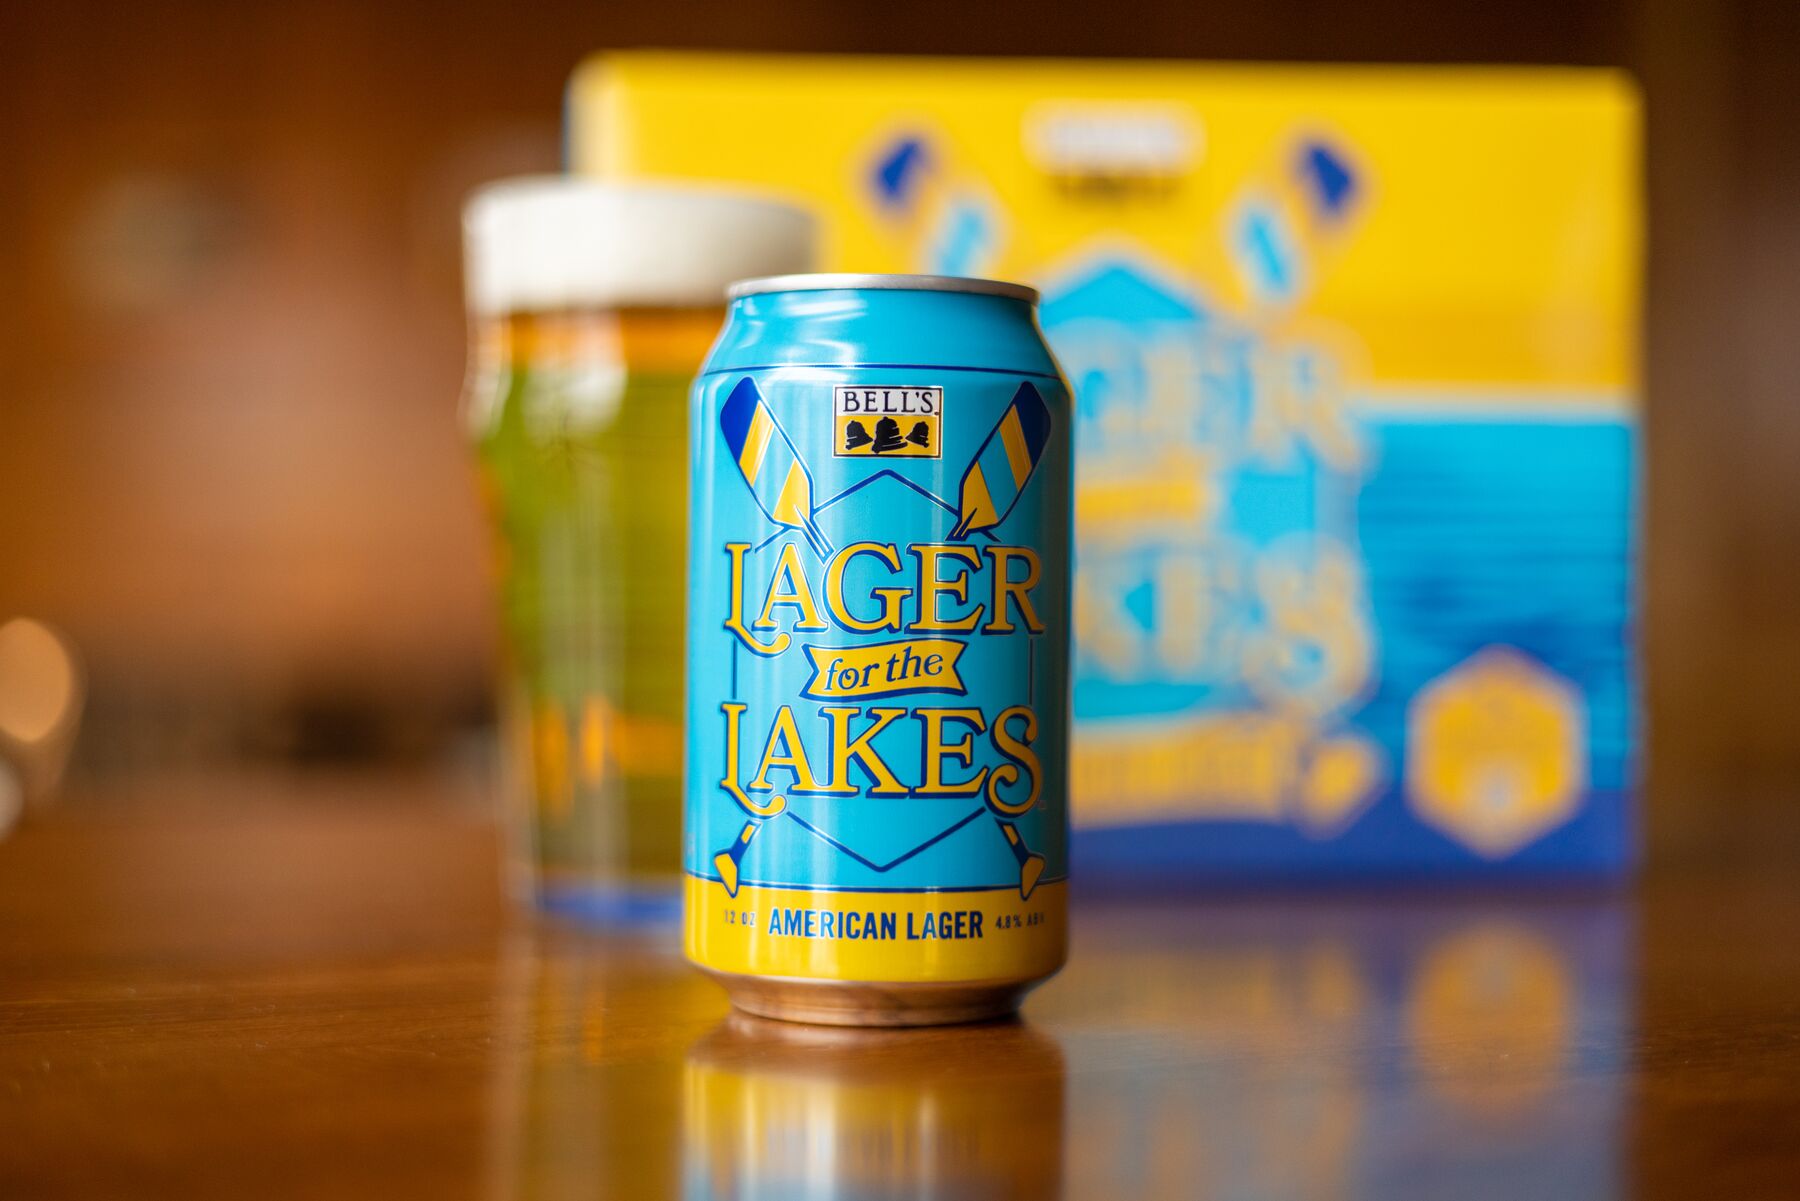 Lakes Lager 5% ABV – Lager - Bowness Bay Brewery